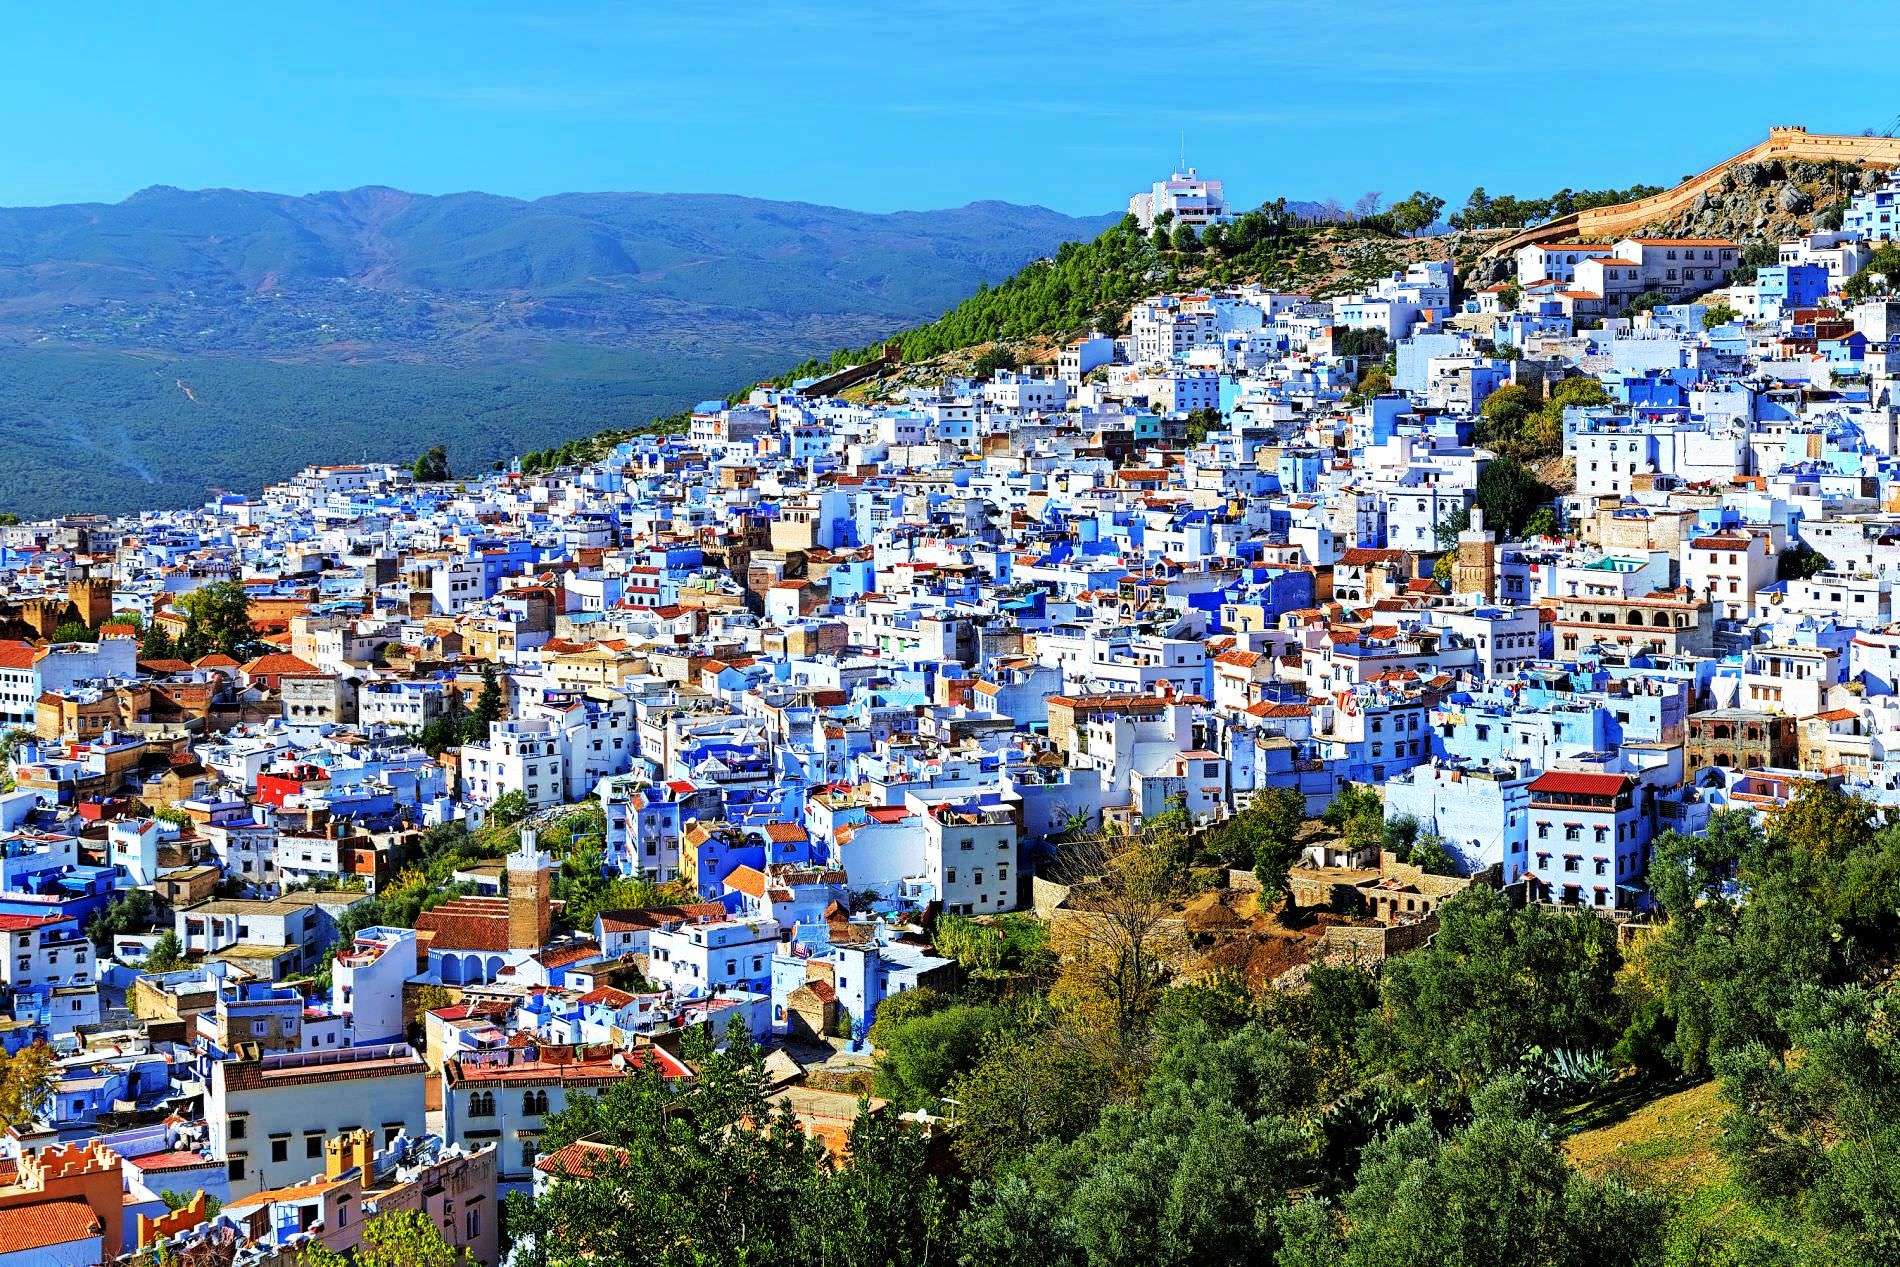 08 days magnificent Morocco tour from Tangier to explore Chefchaouen and Imperial cities of Marrakech & Fez